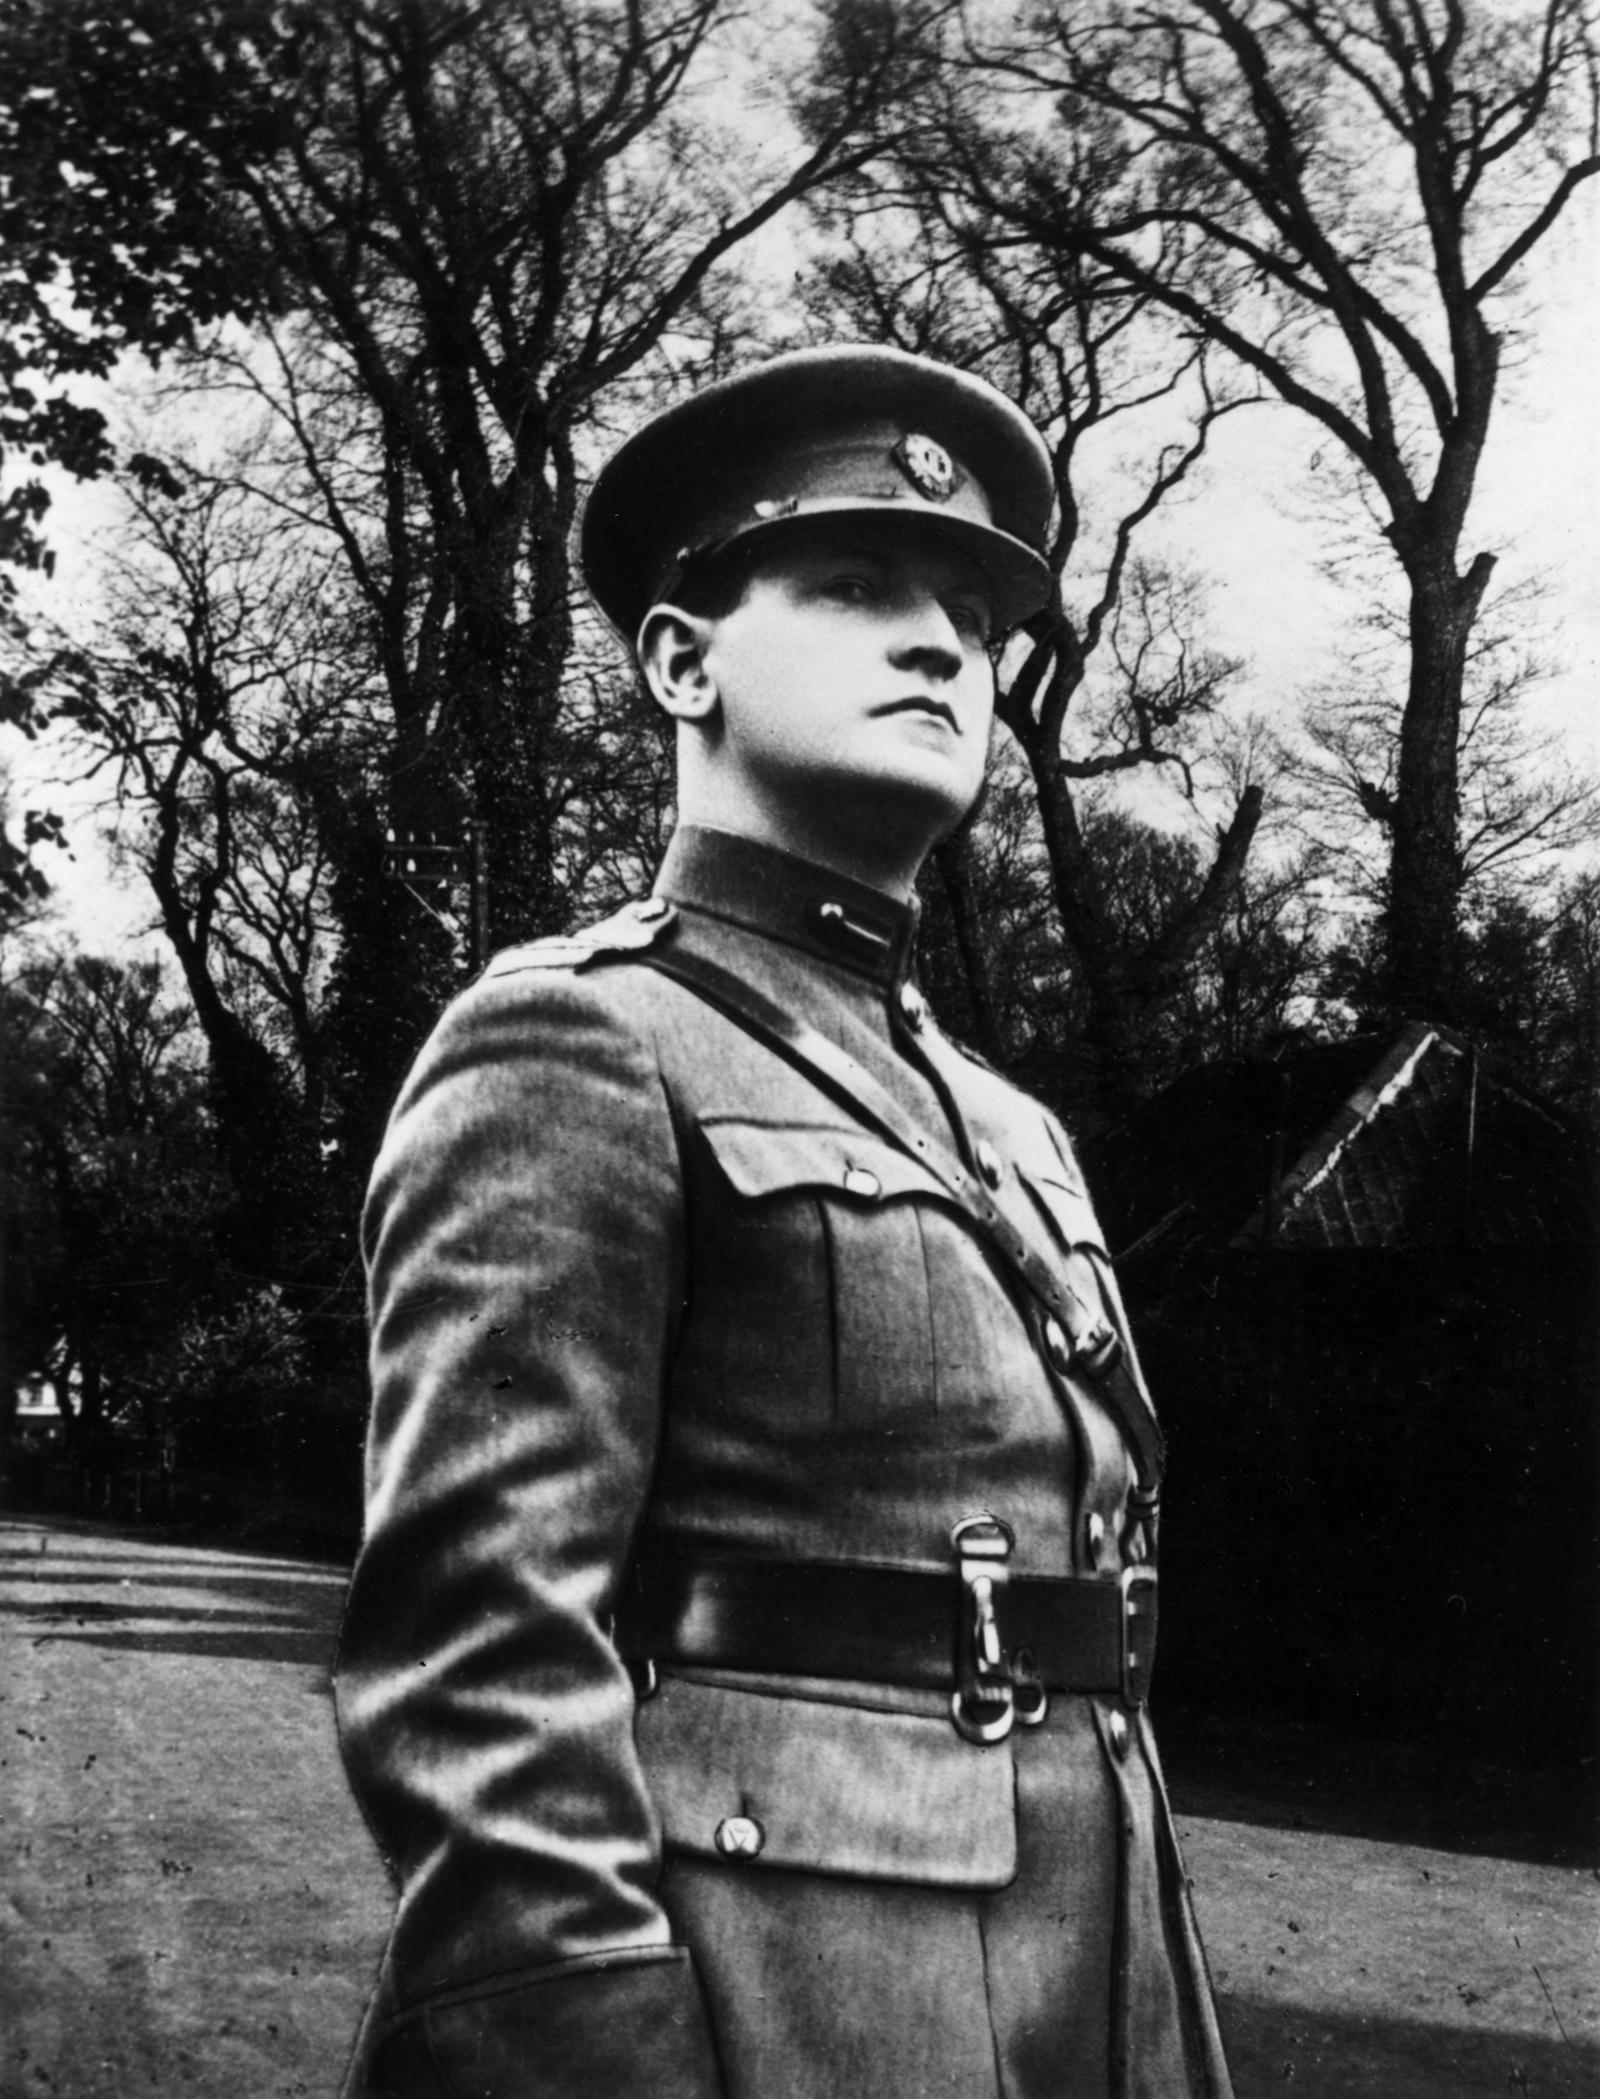 Image - Michael Collins in 1922. Photo: Hulton Archive/Getty Images